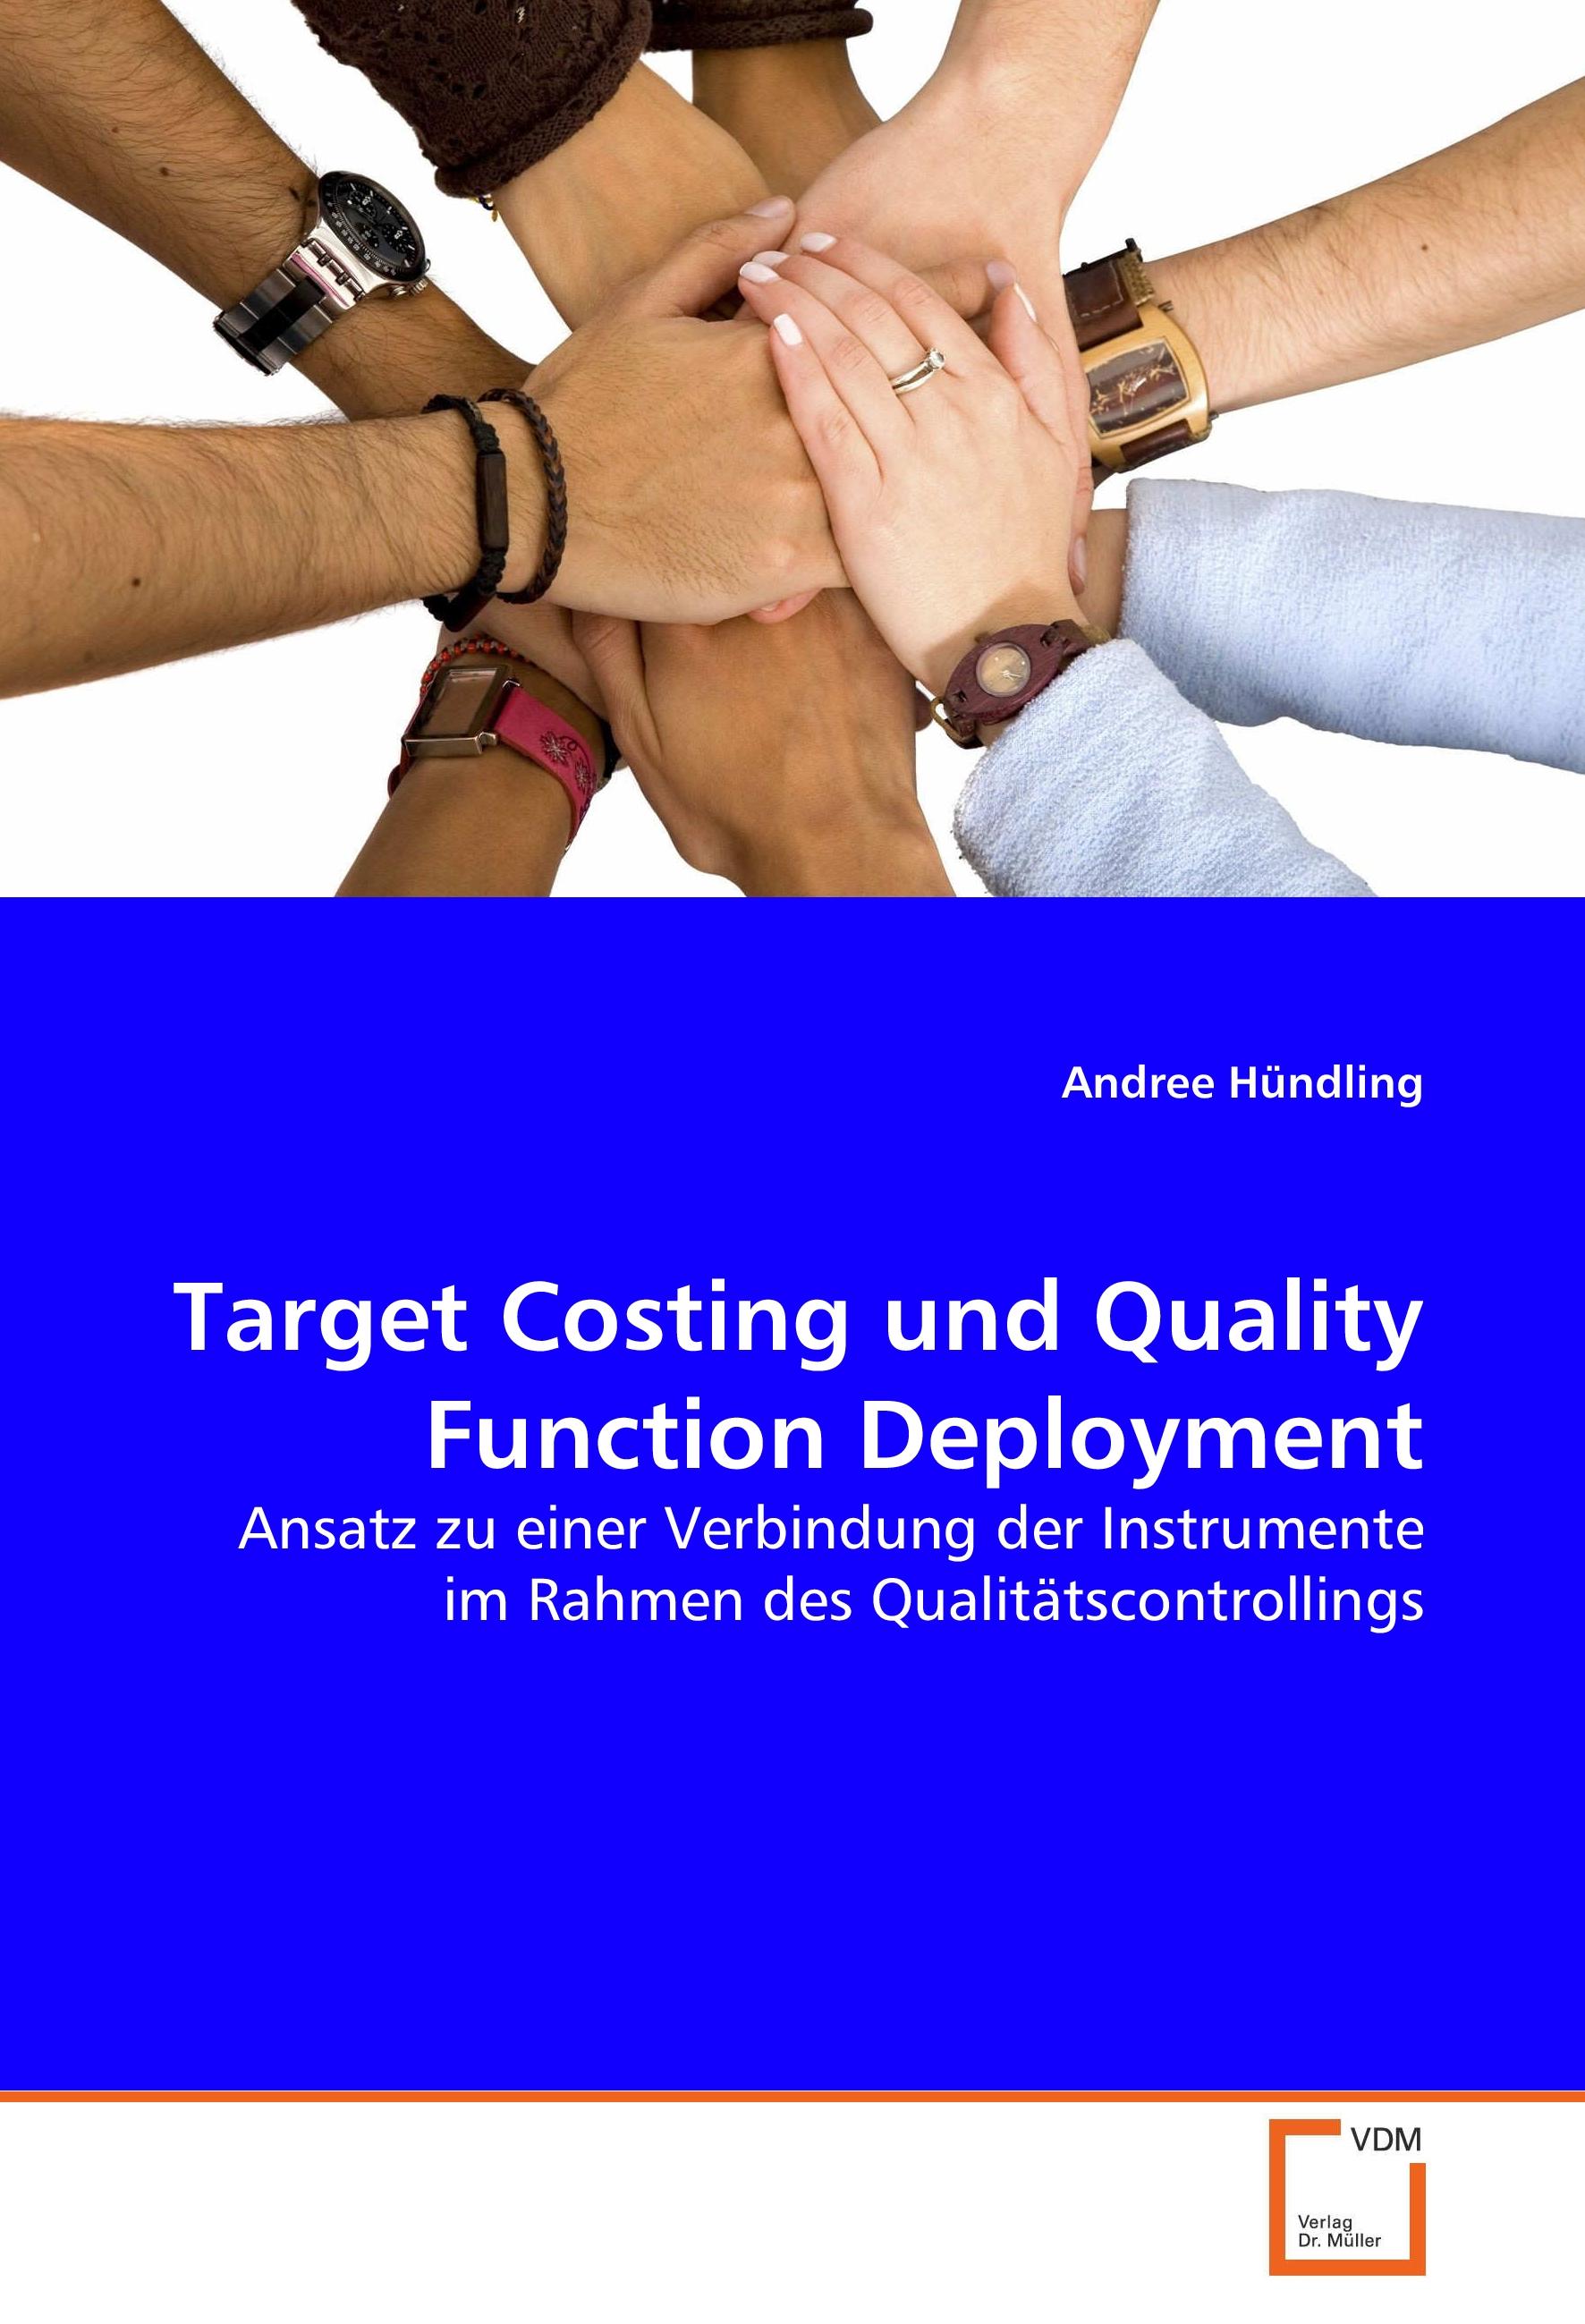 Target Costing und Quality Function Deployment - HÃƒÂ¼ndling, Andree